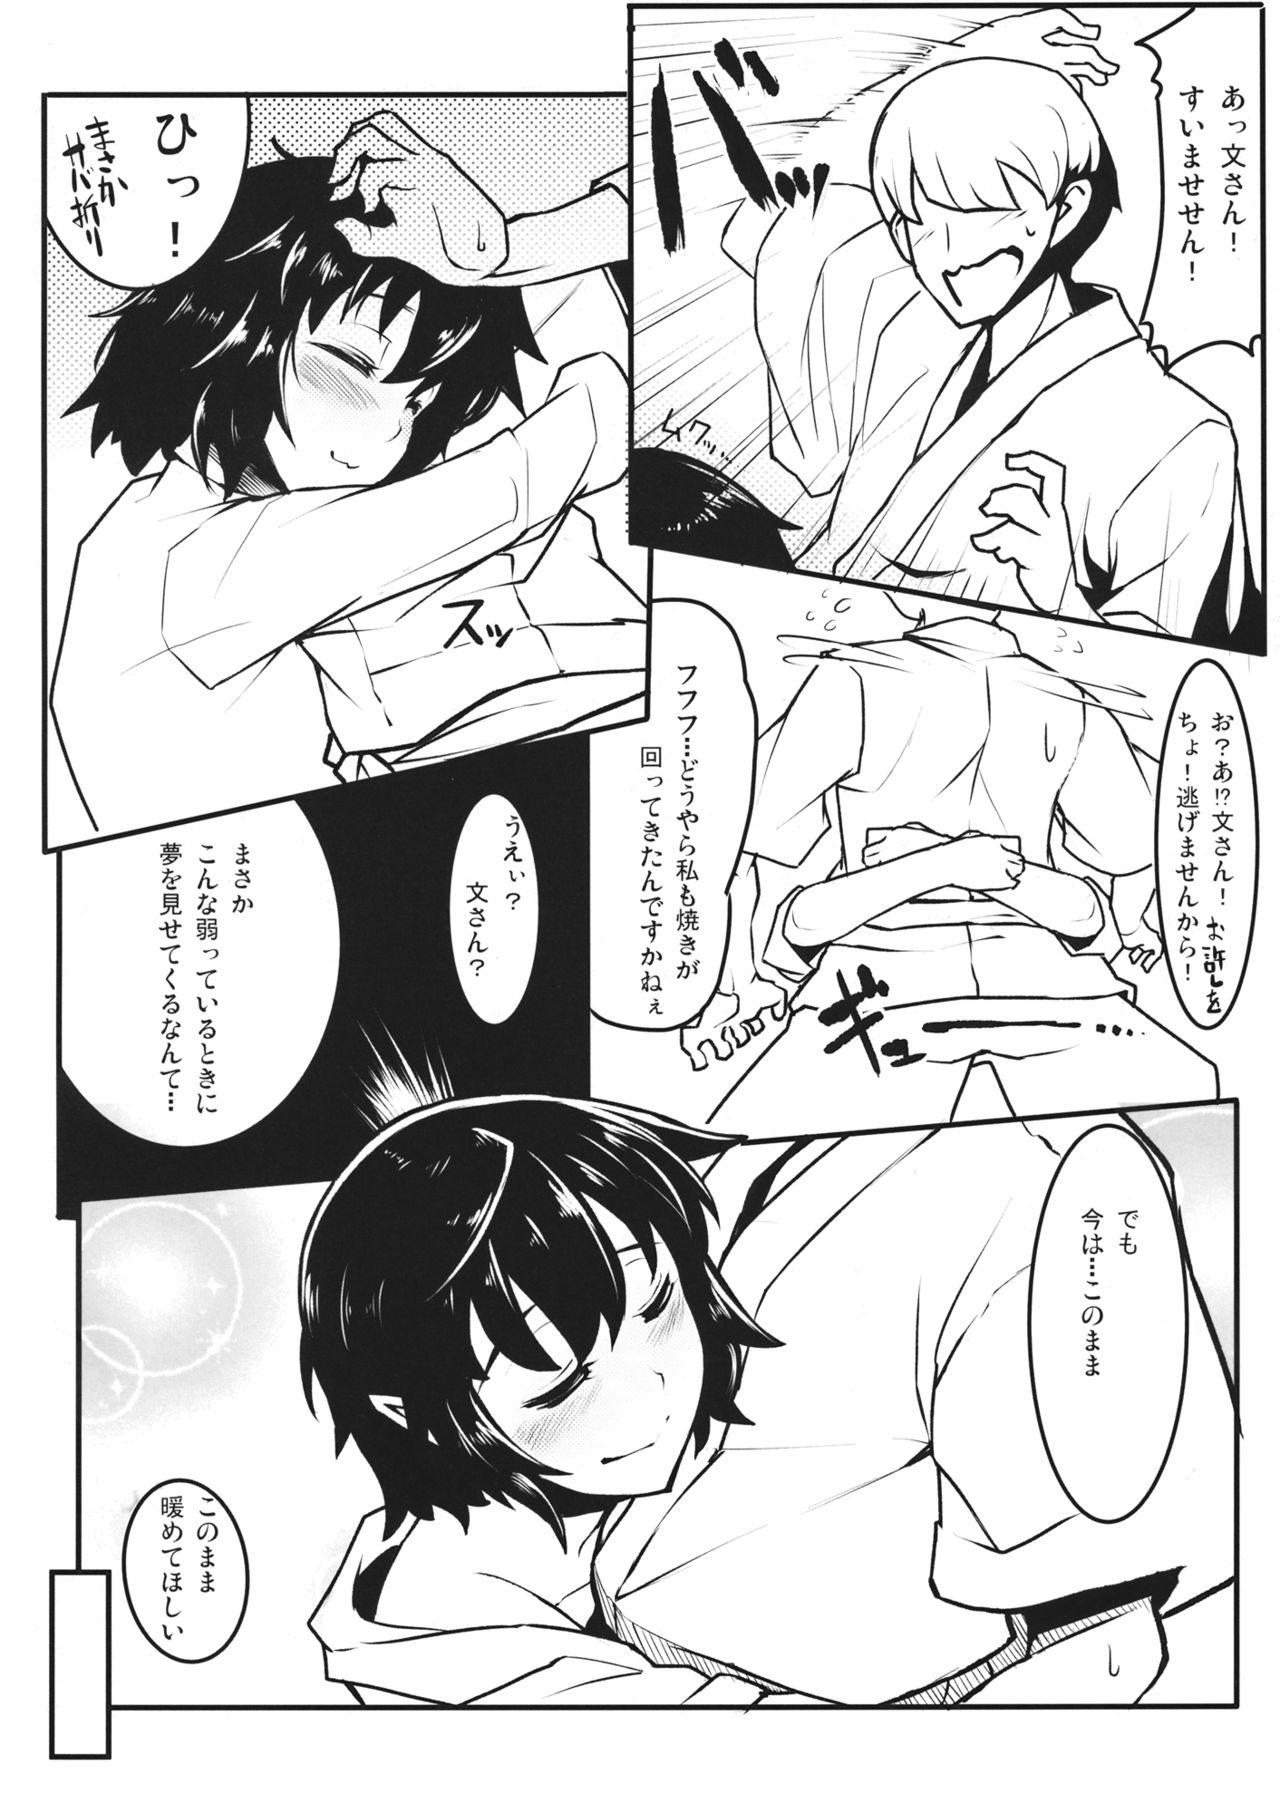 Suruba HIROUCOMPILE - Touhou project People Having Sex - Page 5